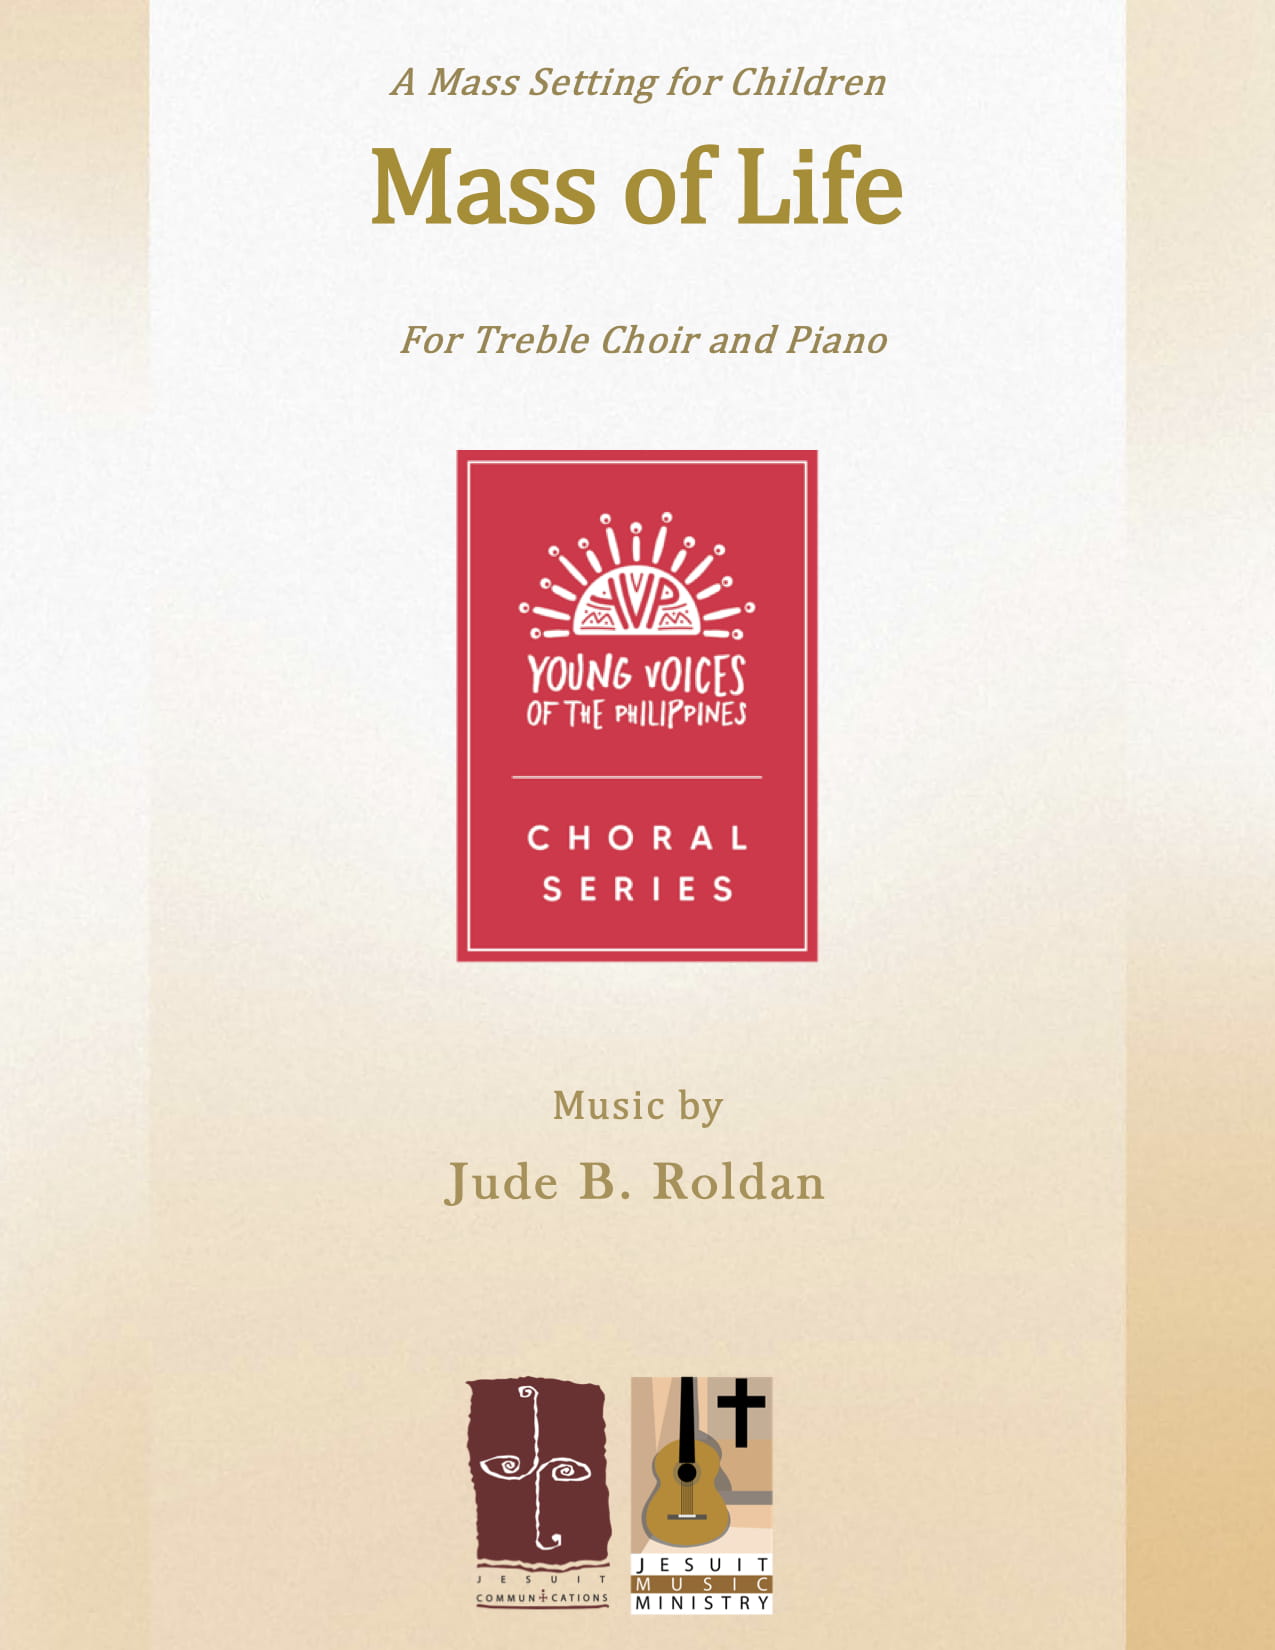 Mass of Life: A Mass Setting for Children (For Treble and Piano)